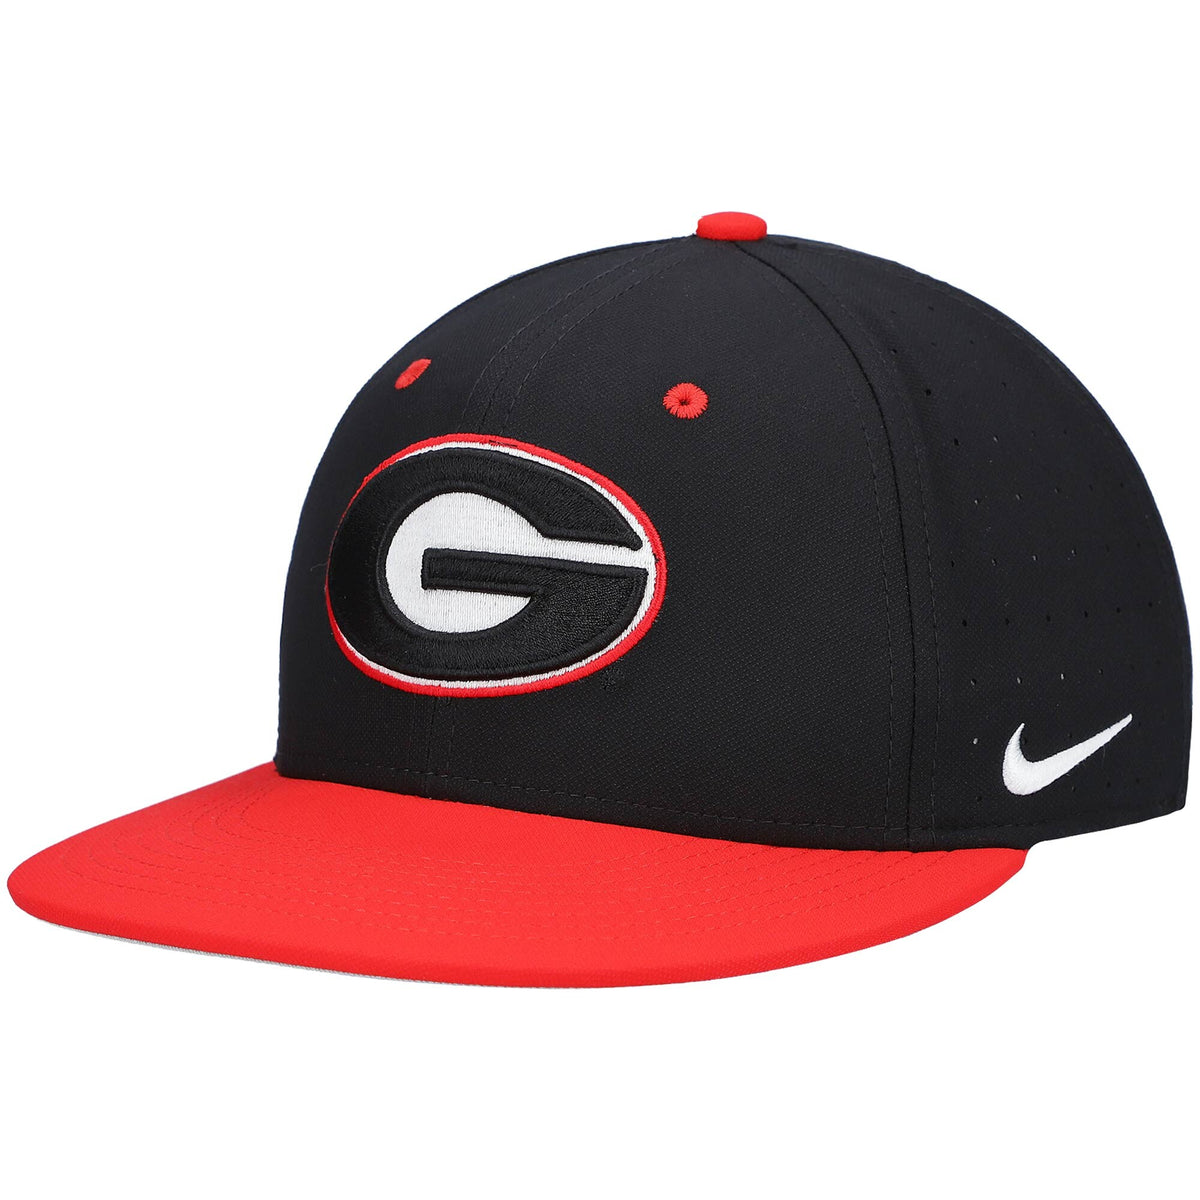 red fitted cap